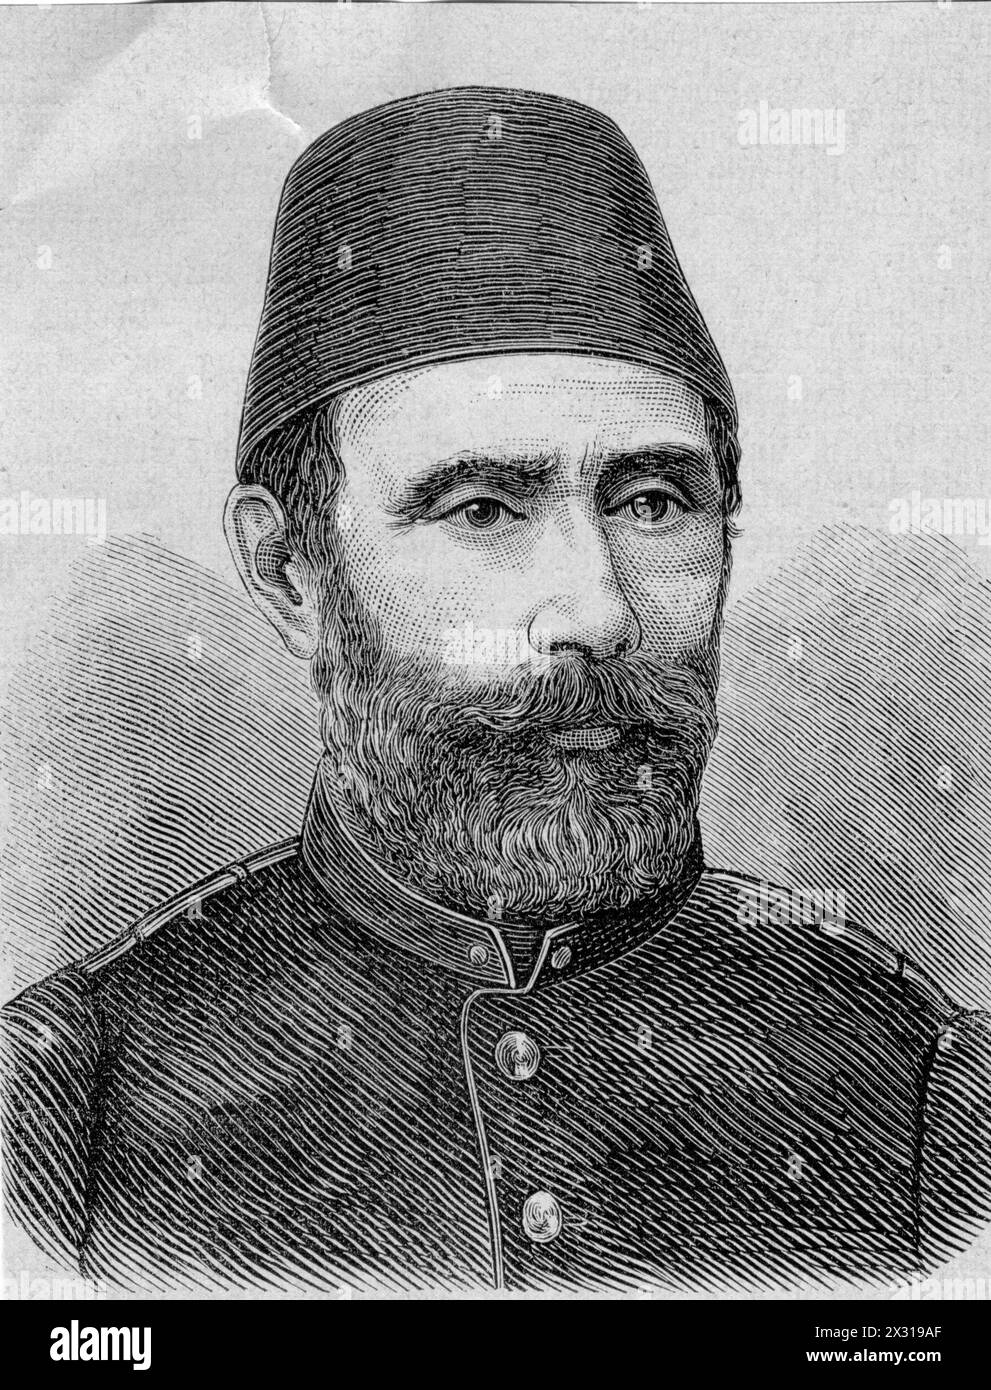 Selami Pascha, Ottoman officer, commander of the Danube Corps, wood engraving, 1877, ADDITIONAL-RIGHTS-CLEARANCE-INFO-NOT-AVAILABLE Stock Photo